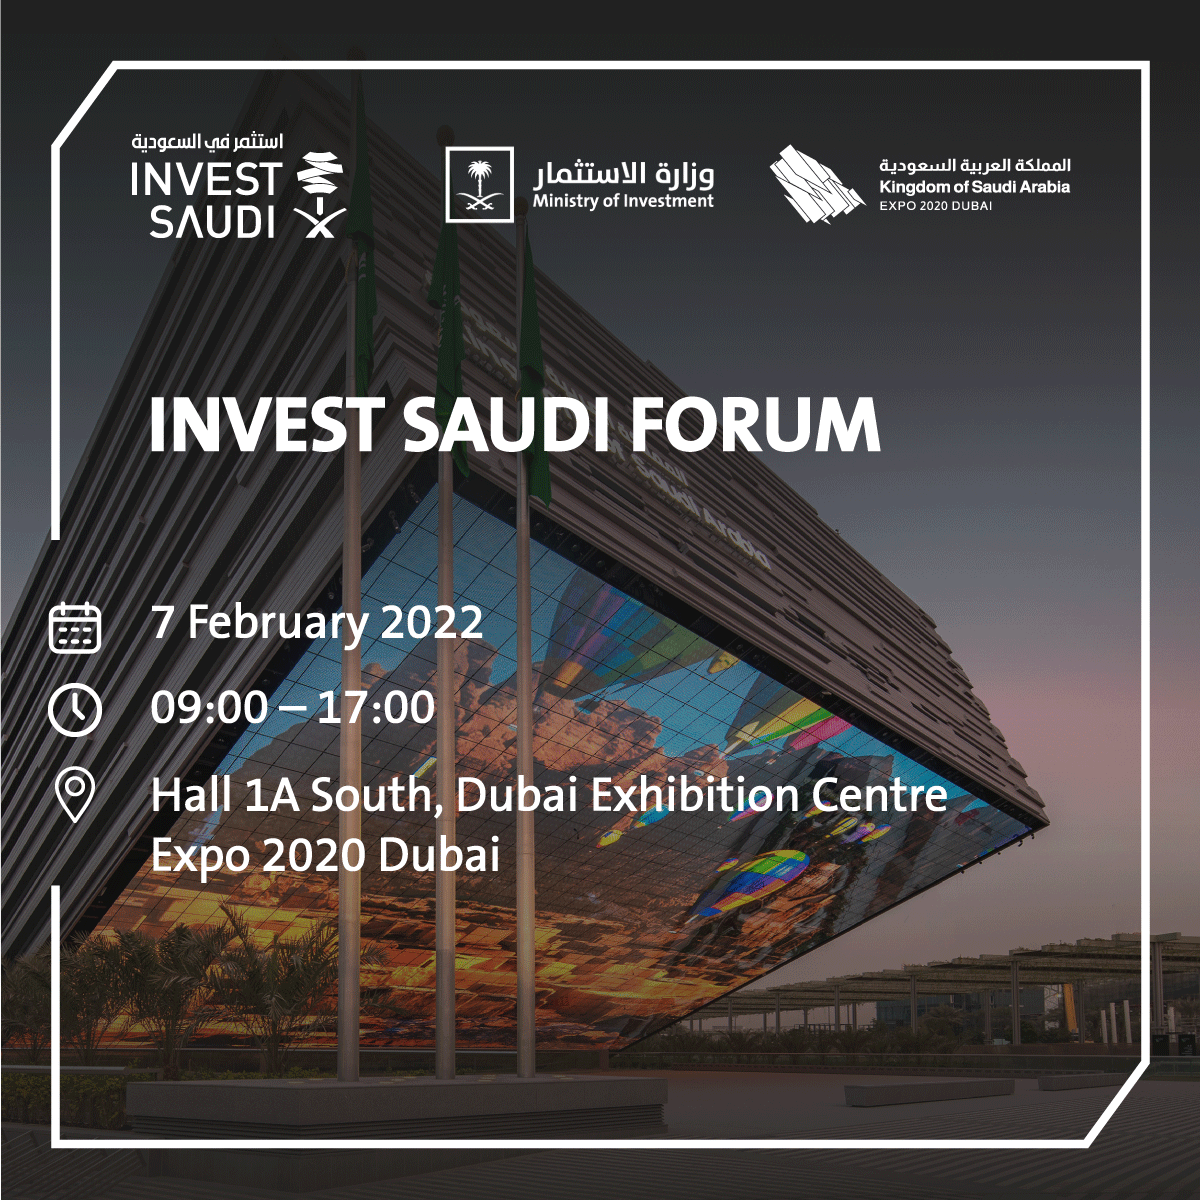 Transplant stemme Sanctuary INVEST SAUDI on Twitter: "🗓️Save the date 7️⃣ February 2022. @MISA is  hosting the #InvestSaudiForum at @expo2020dubai📍 The forum brings  #SaudiArabia's investment opportunities to market across top sectors  including human capital development,